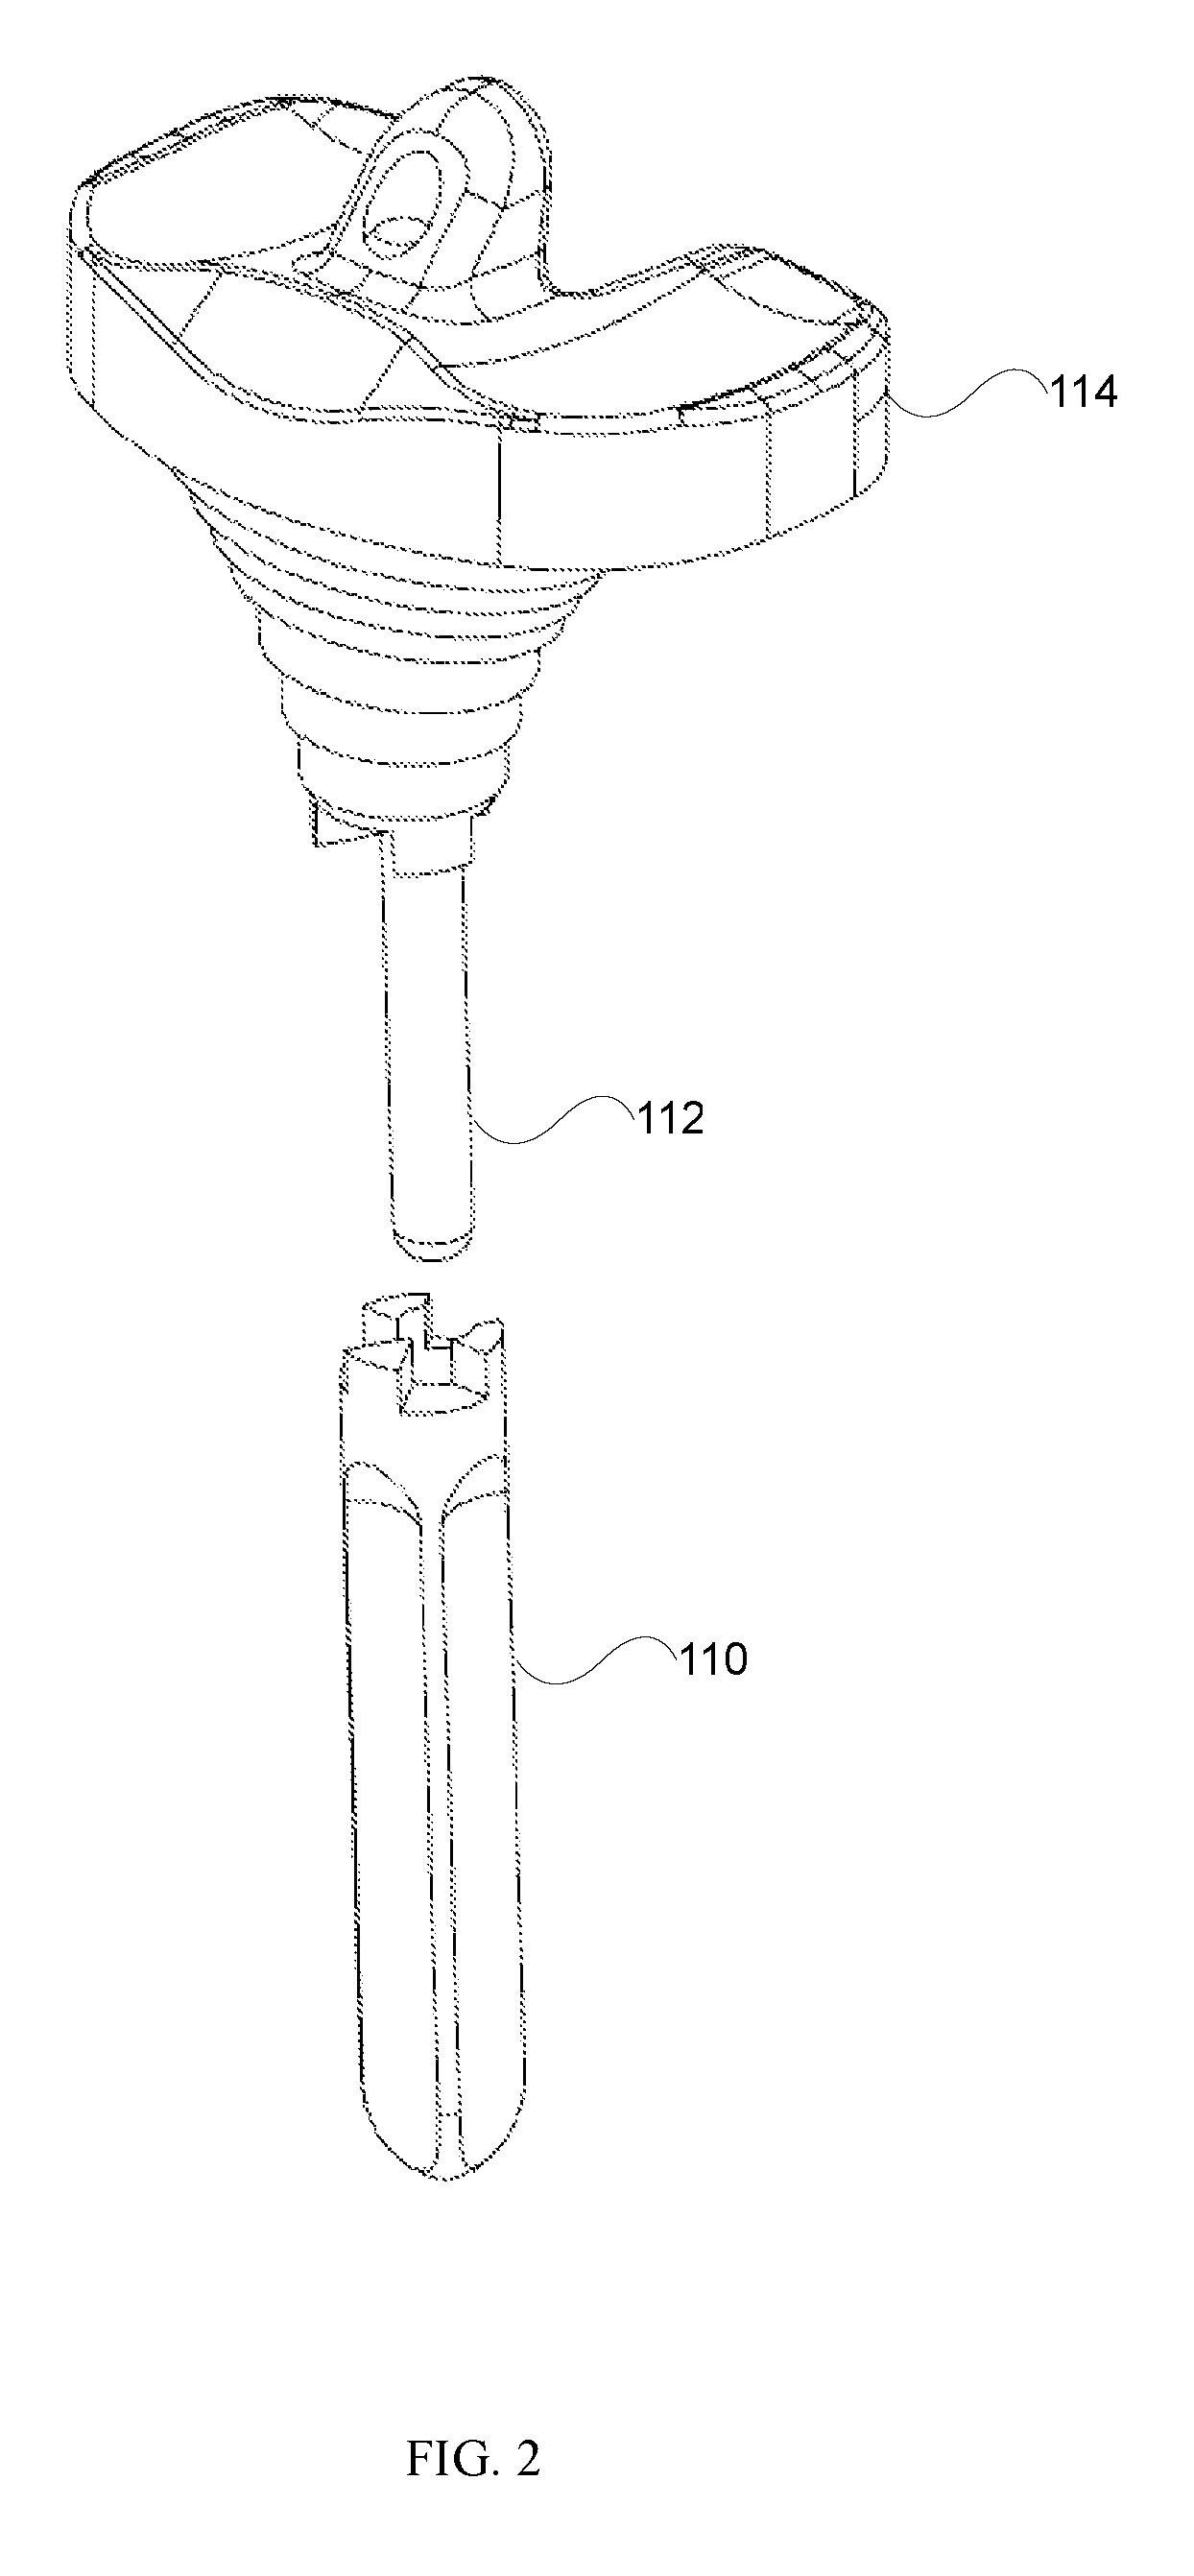 Implant system for knee prosthesis